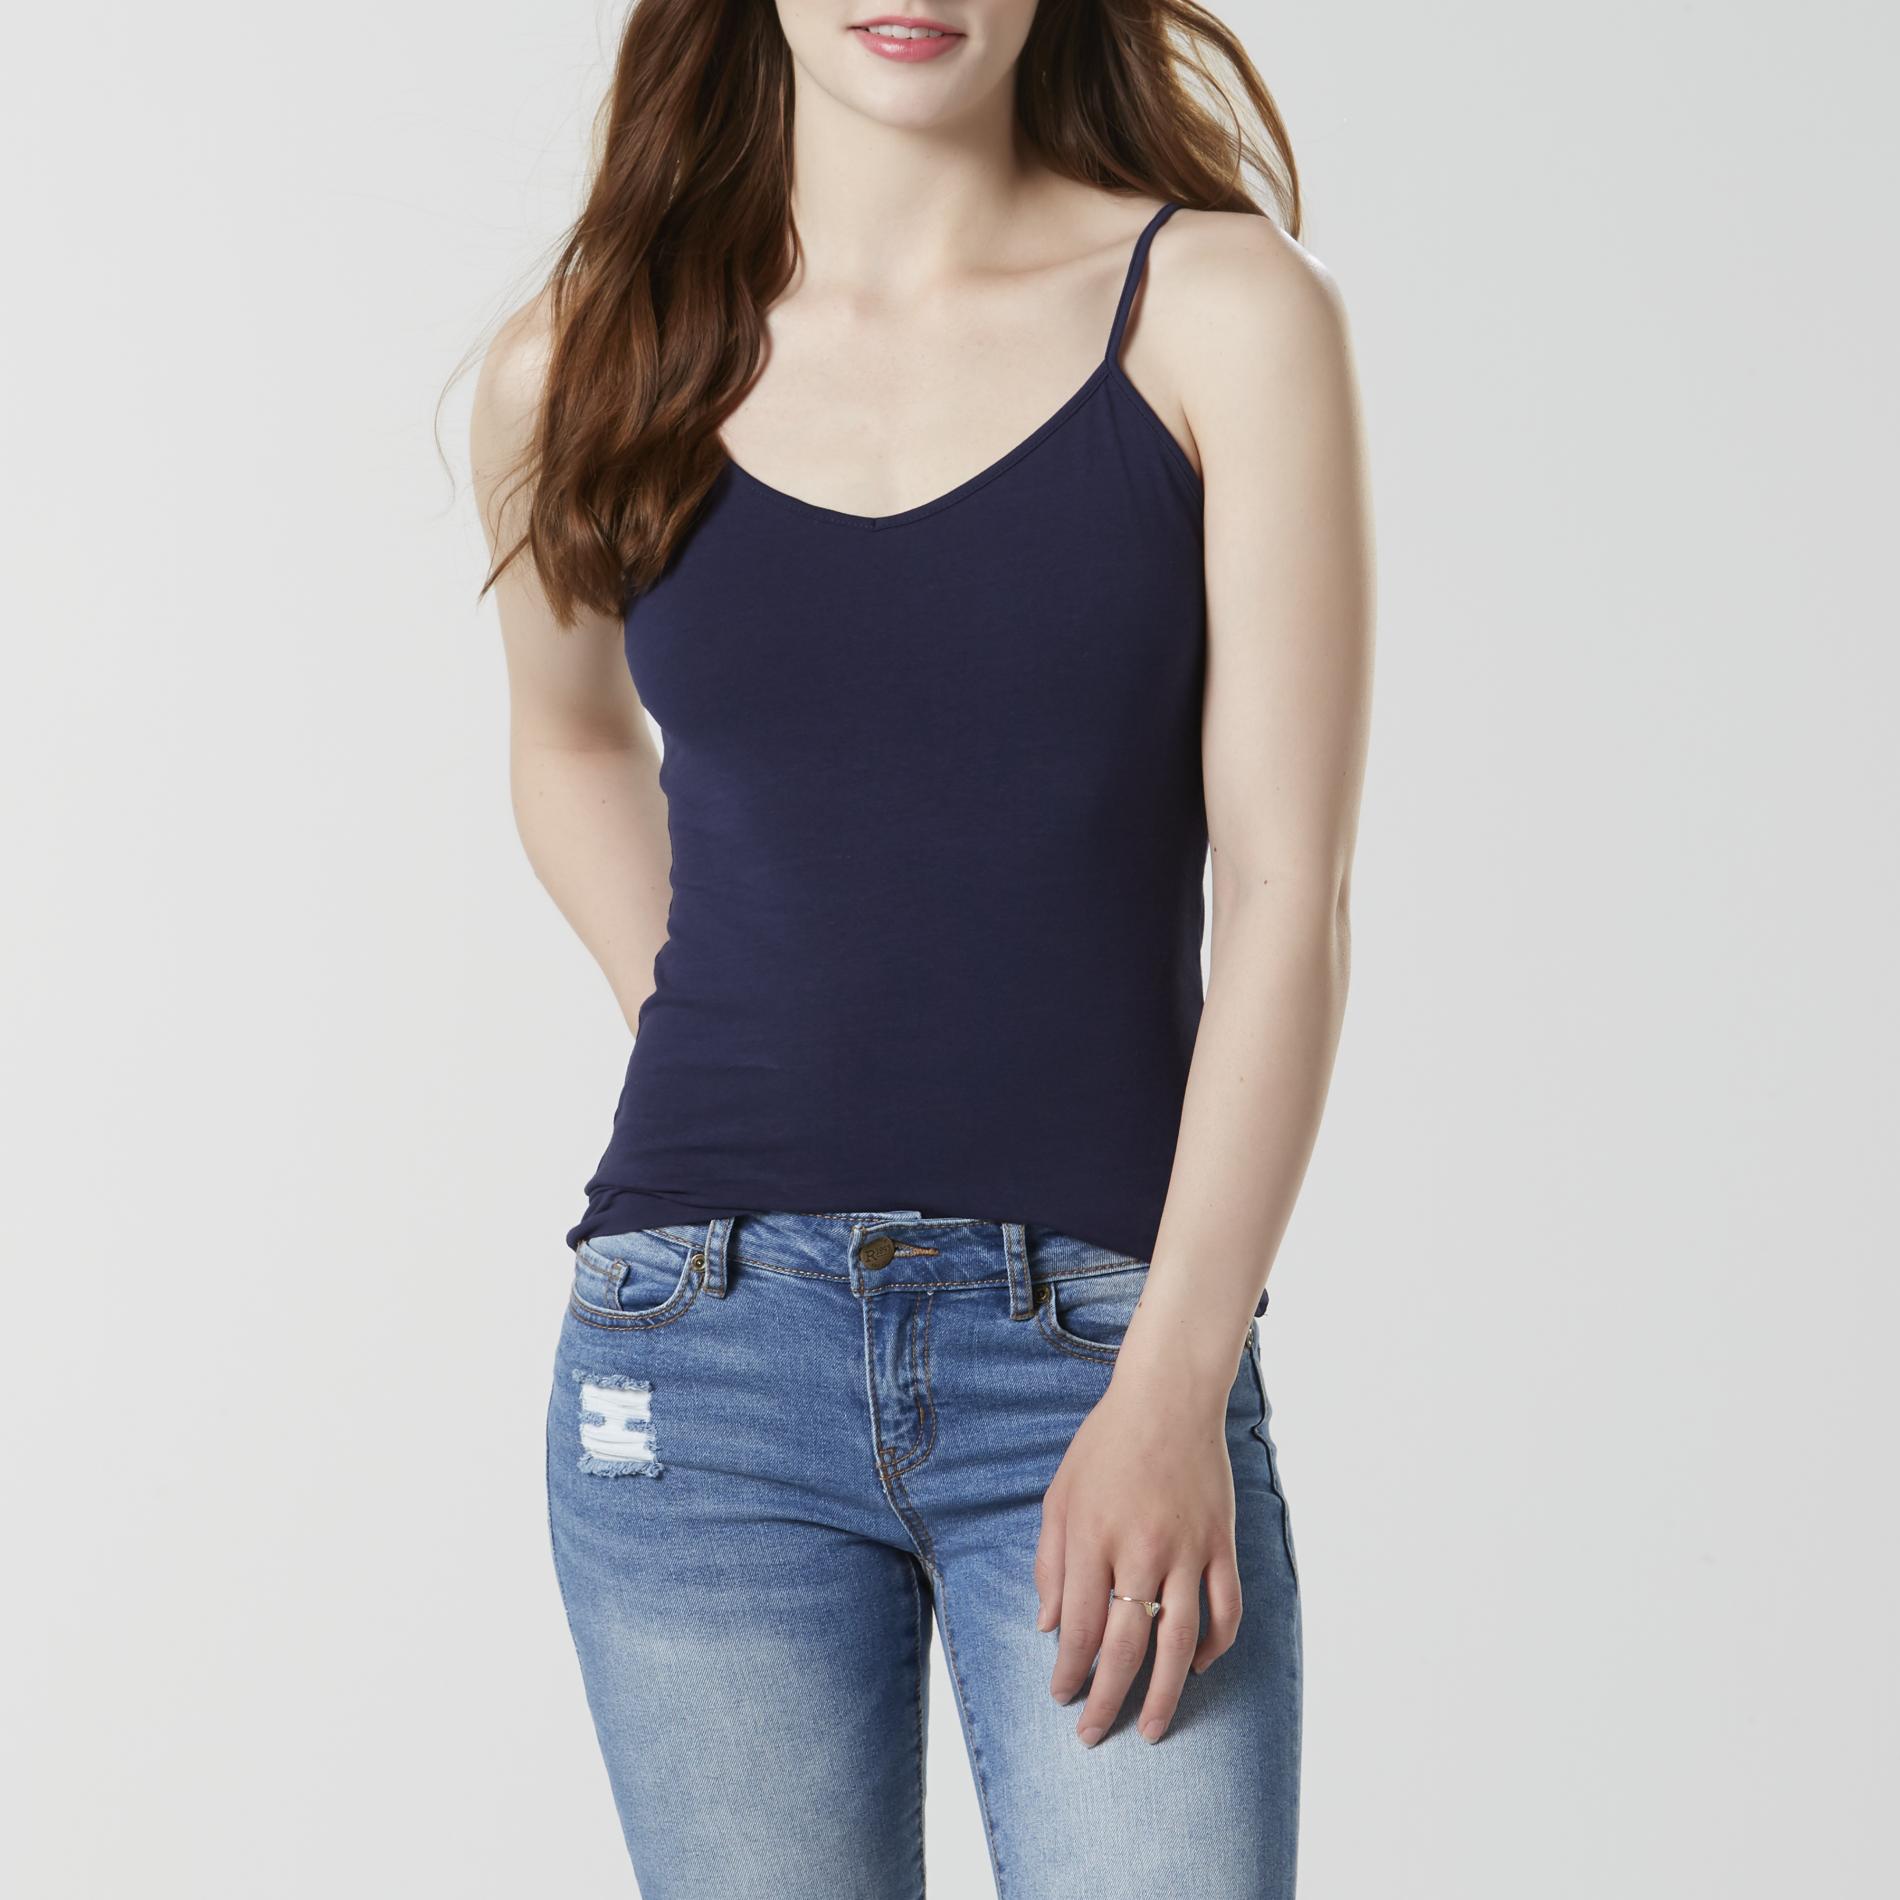 Simply Styled Women's Camisole